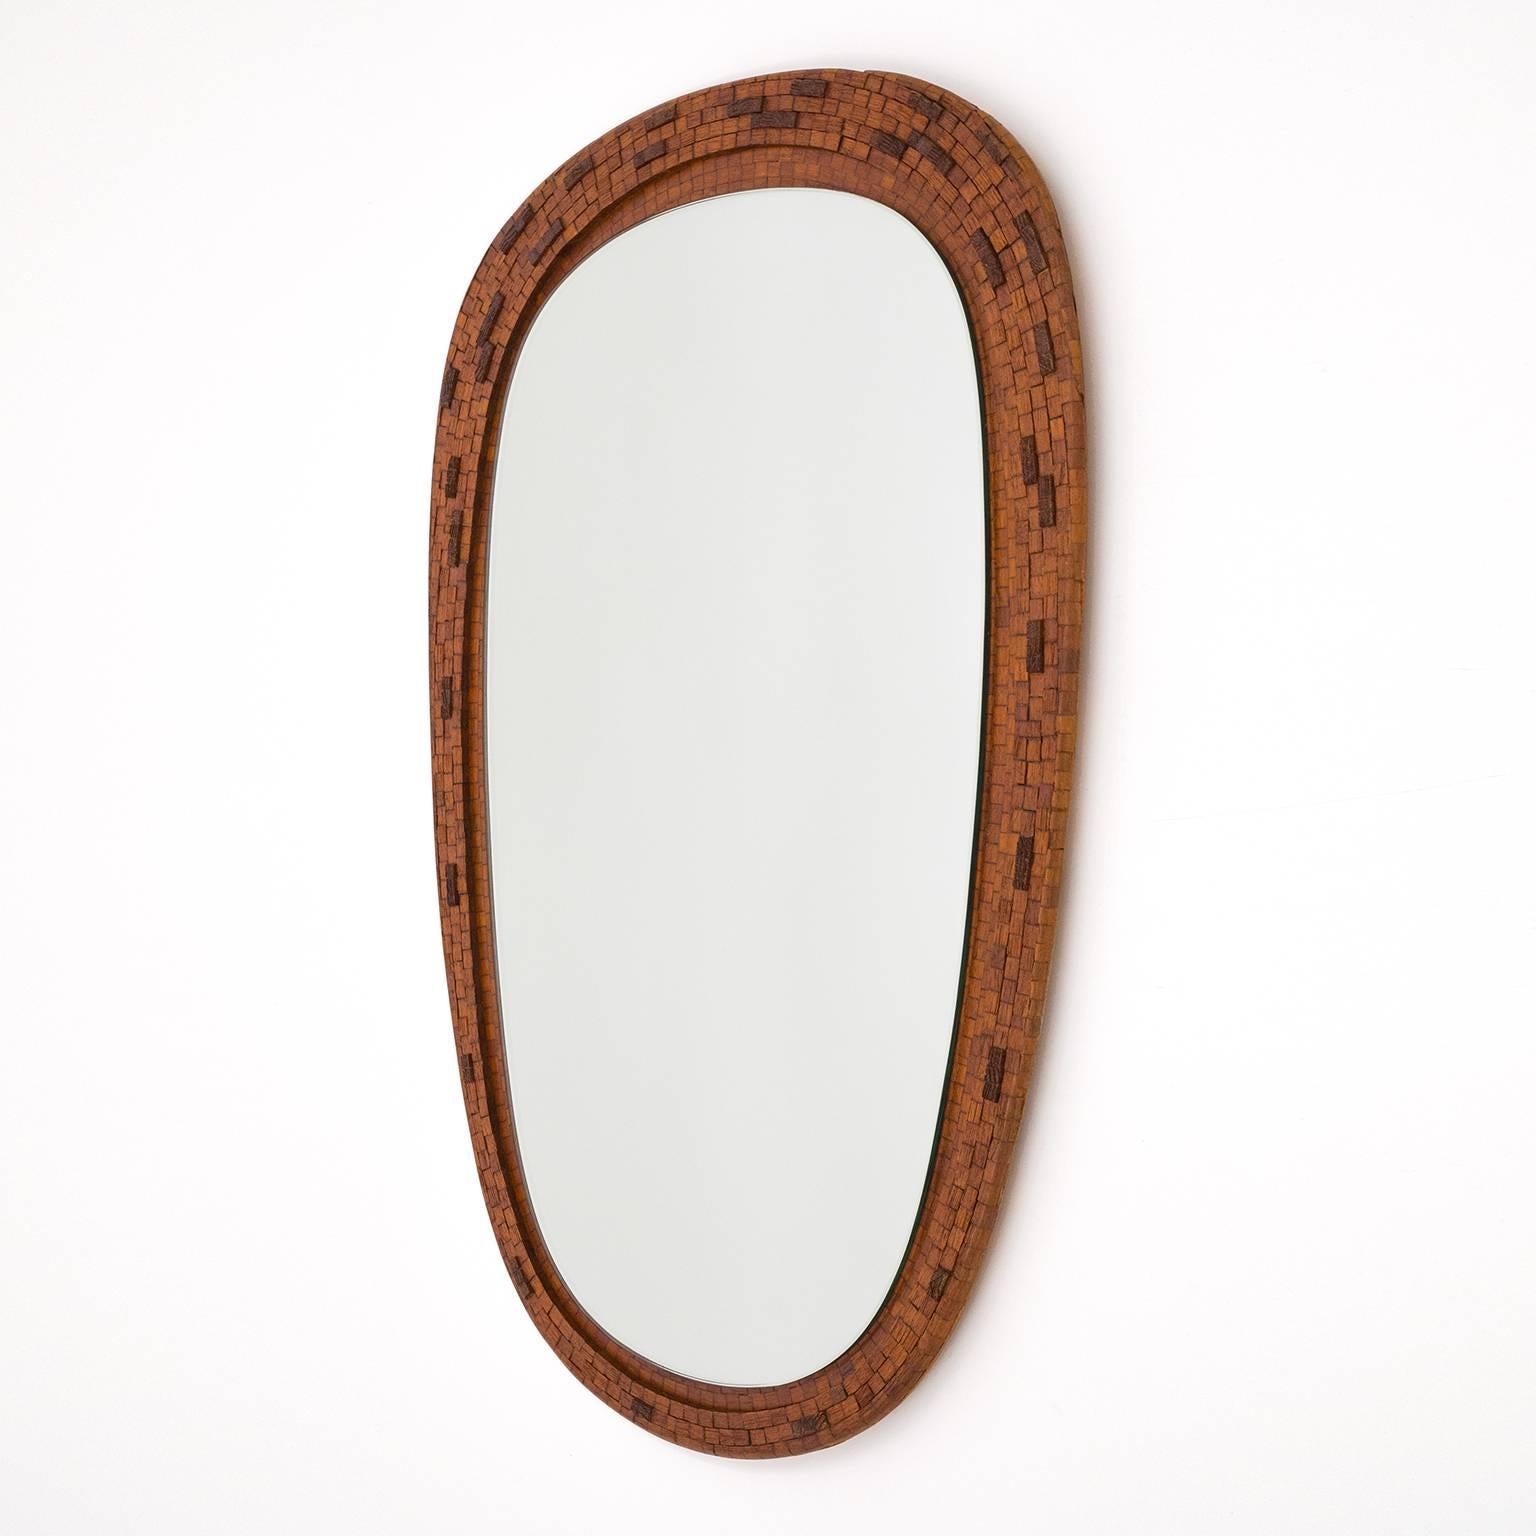 Very unique tapered oval mirror with a rare teak mosaic design. Beautifully crafted with tiers of varying curves and a lot of attention to detail, all the way to the veneer on the backside.